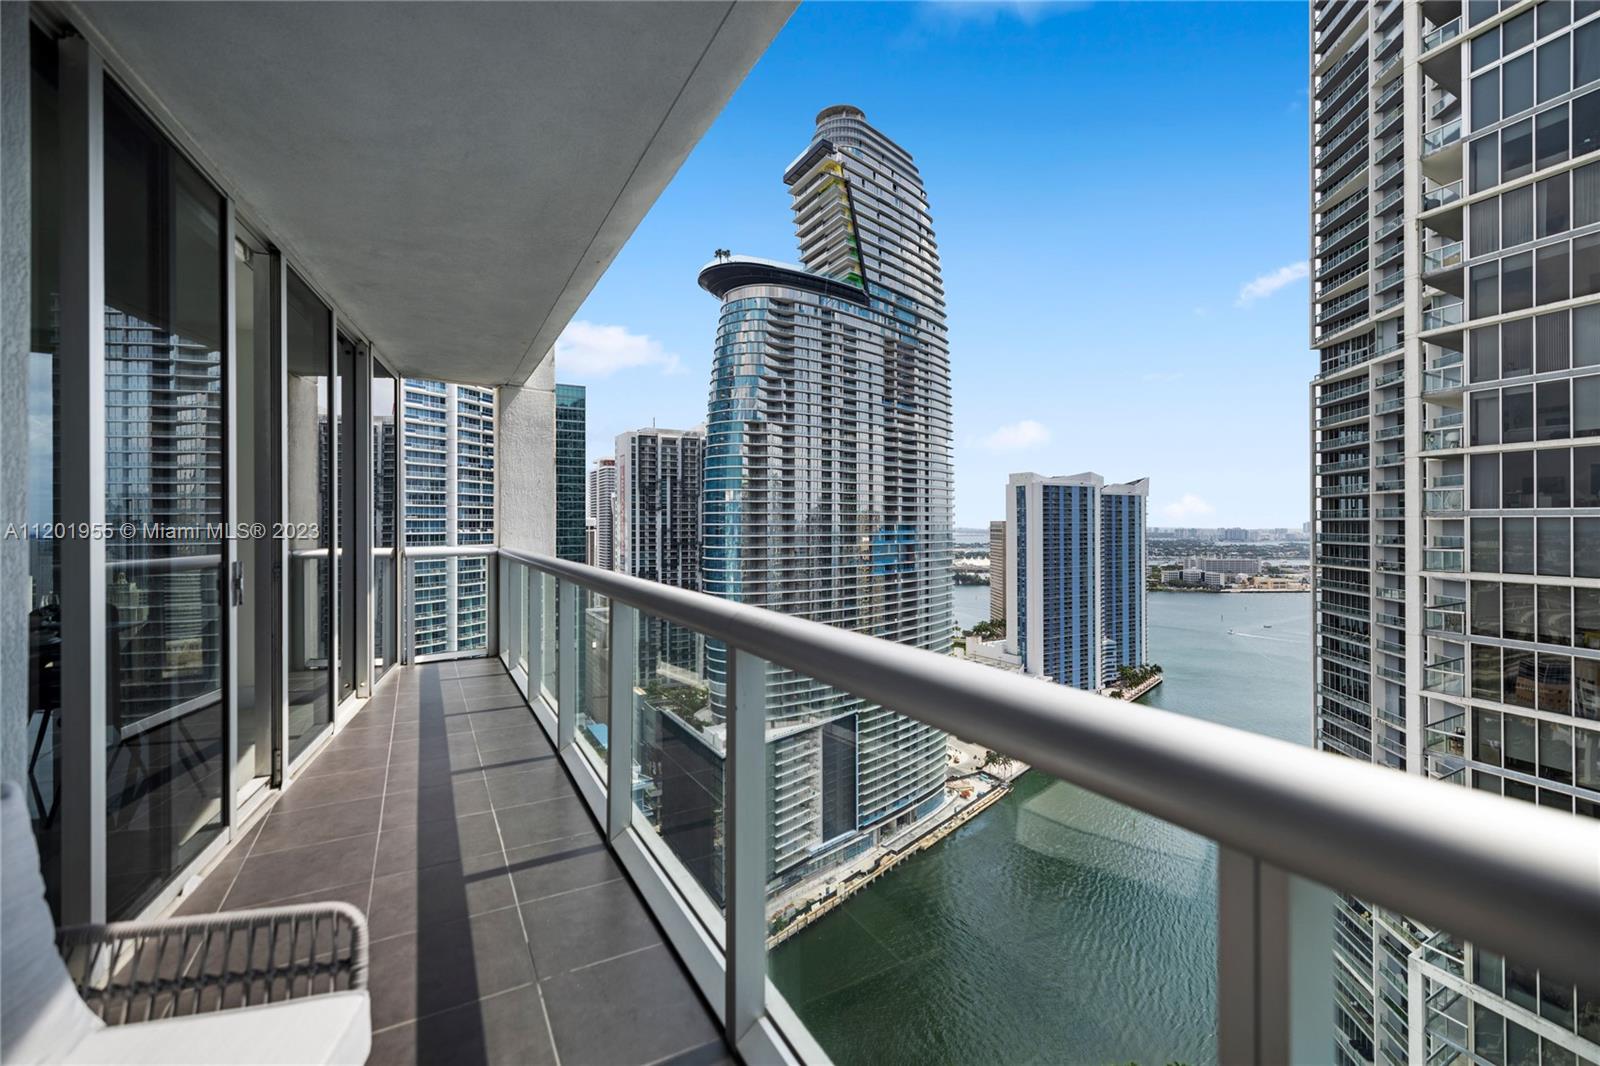 Welcome to Icon Brickell Tower 3, the most amazing corner unit with stunning views of the Biscayne Bay, Miami River and Brickell / Downtown Skyline. Featuring 2 bed / 2 bath 1,386 SQFT, custom made closets, beautiful kitchen with high end finishes and ample space for entertainment. Take advantage of short term rental allowance via AIRBNB, VRBO with average potential rental income of $10,000 /month. Located in the heart of Brickell, Miami’s financial district and few blocks away from banks, restaurants, supermarkets and Brickell City Center. Great opportunity for investors! Icon Brickell offers state of the art amenities including exercise room, billiard room, business center, theater, heated lap pool, spa, community room, child play area, 24 hour security, valet parking and more! Call LA!